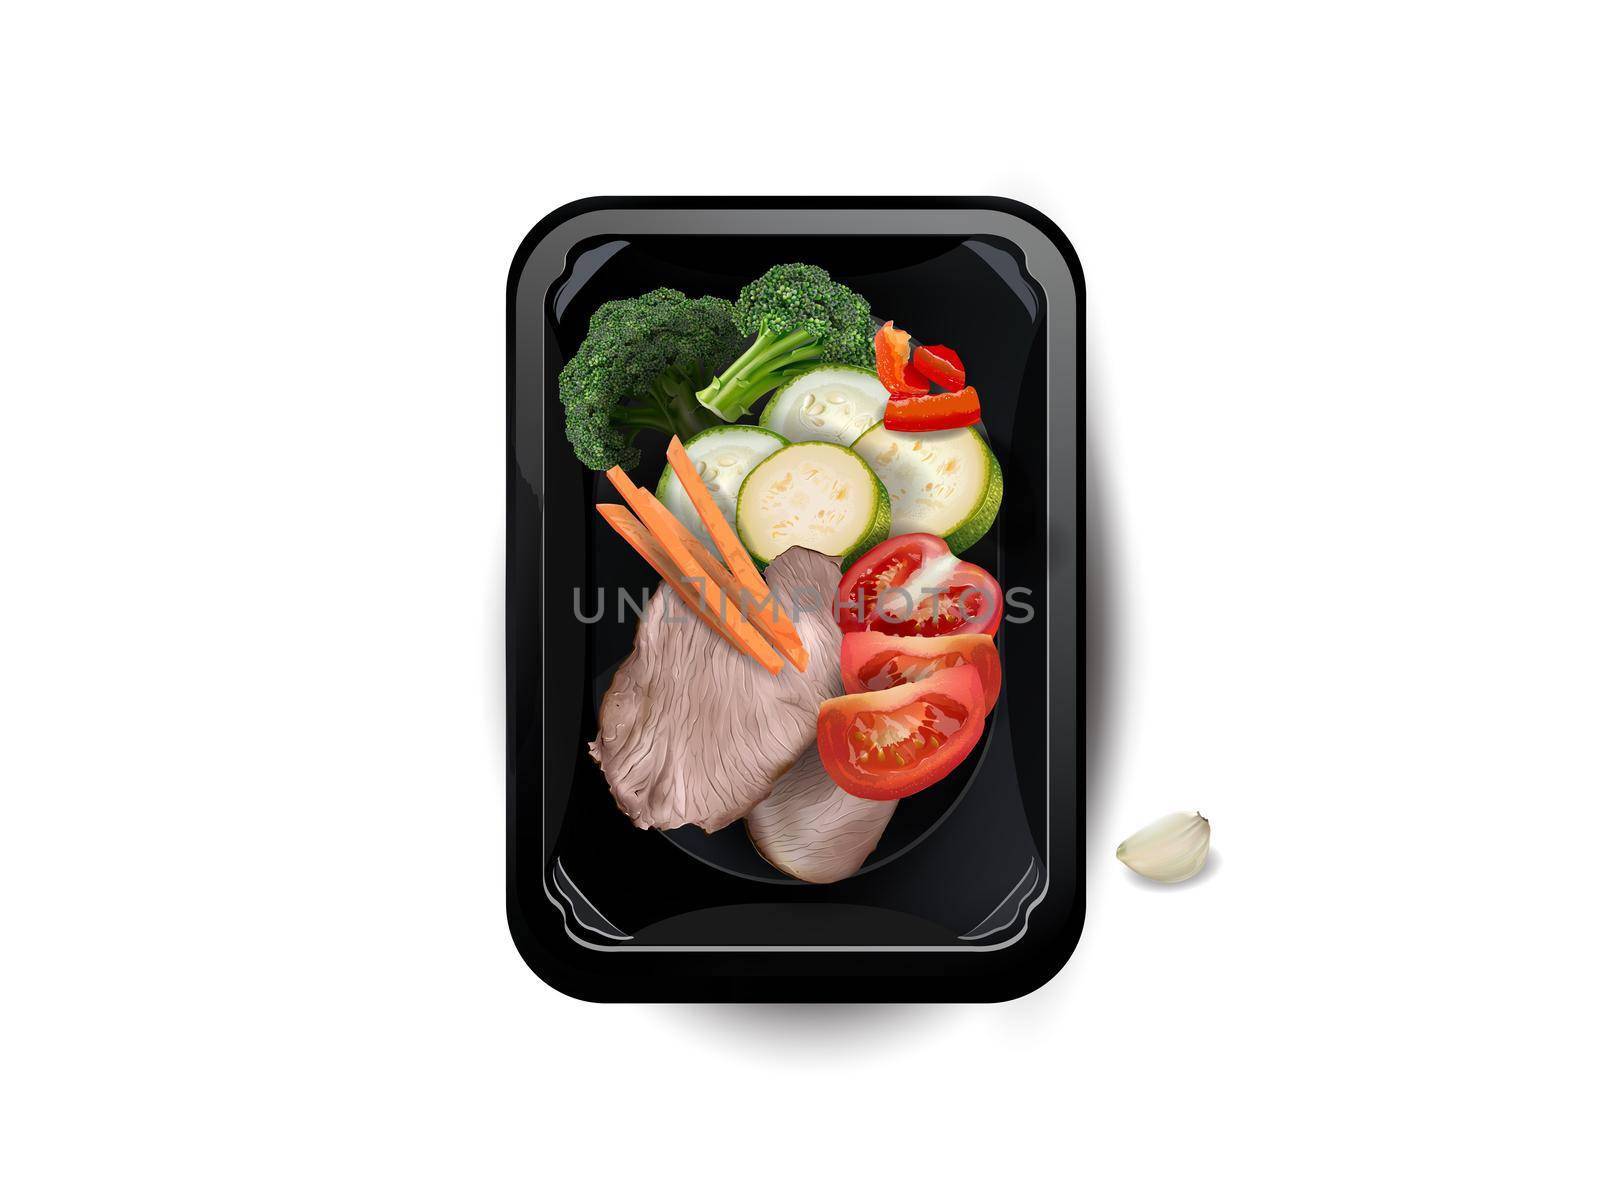 Boiled meat with zucchini, broccoli and tomatoes in a lunchbox. by ConceptCafe